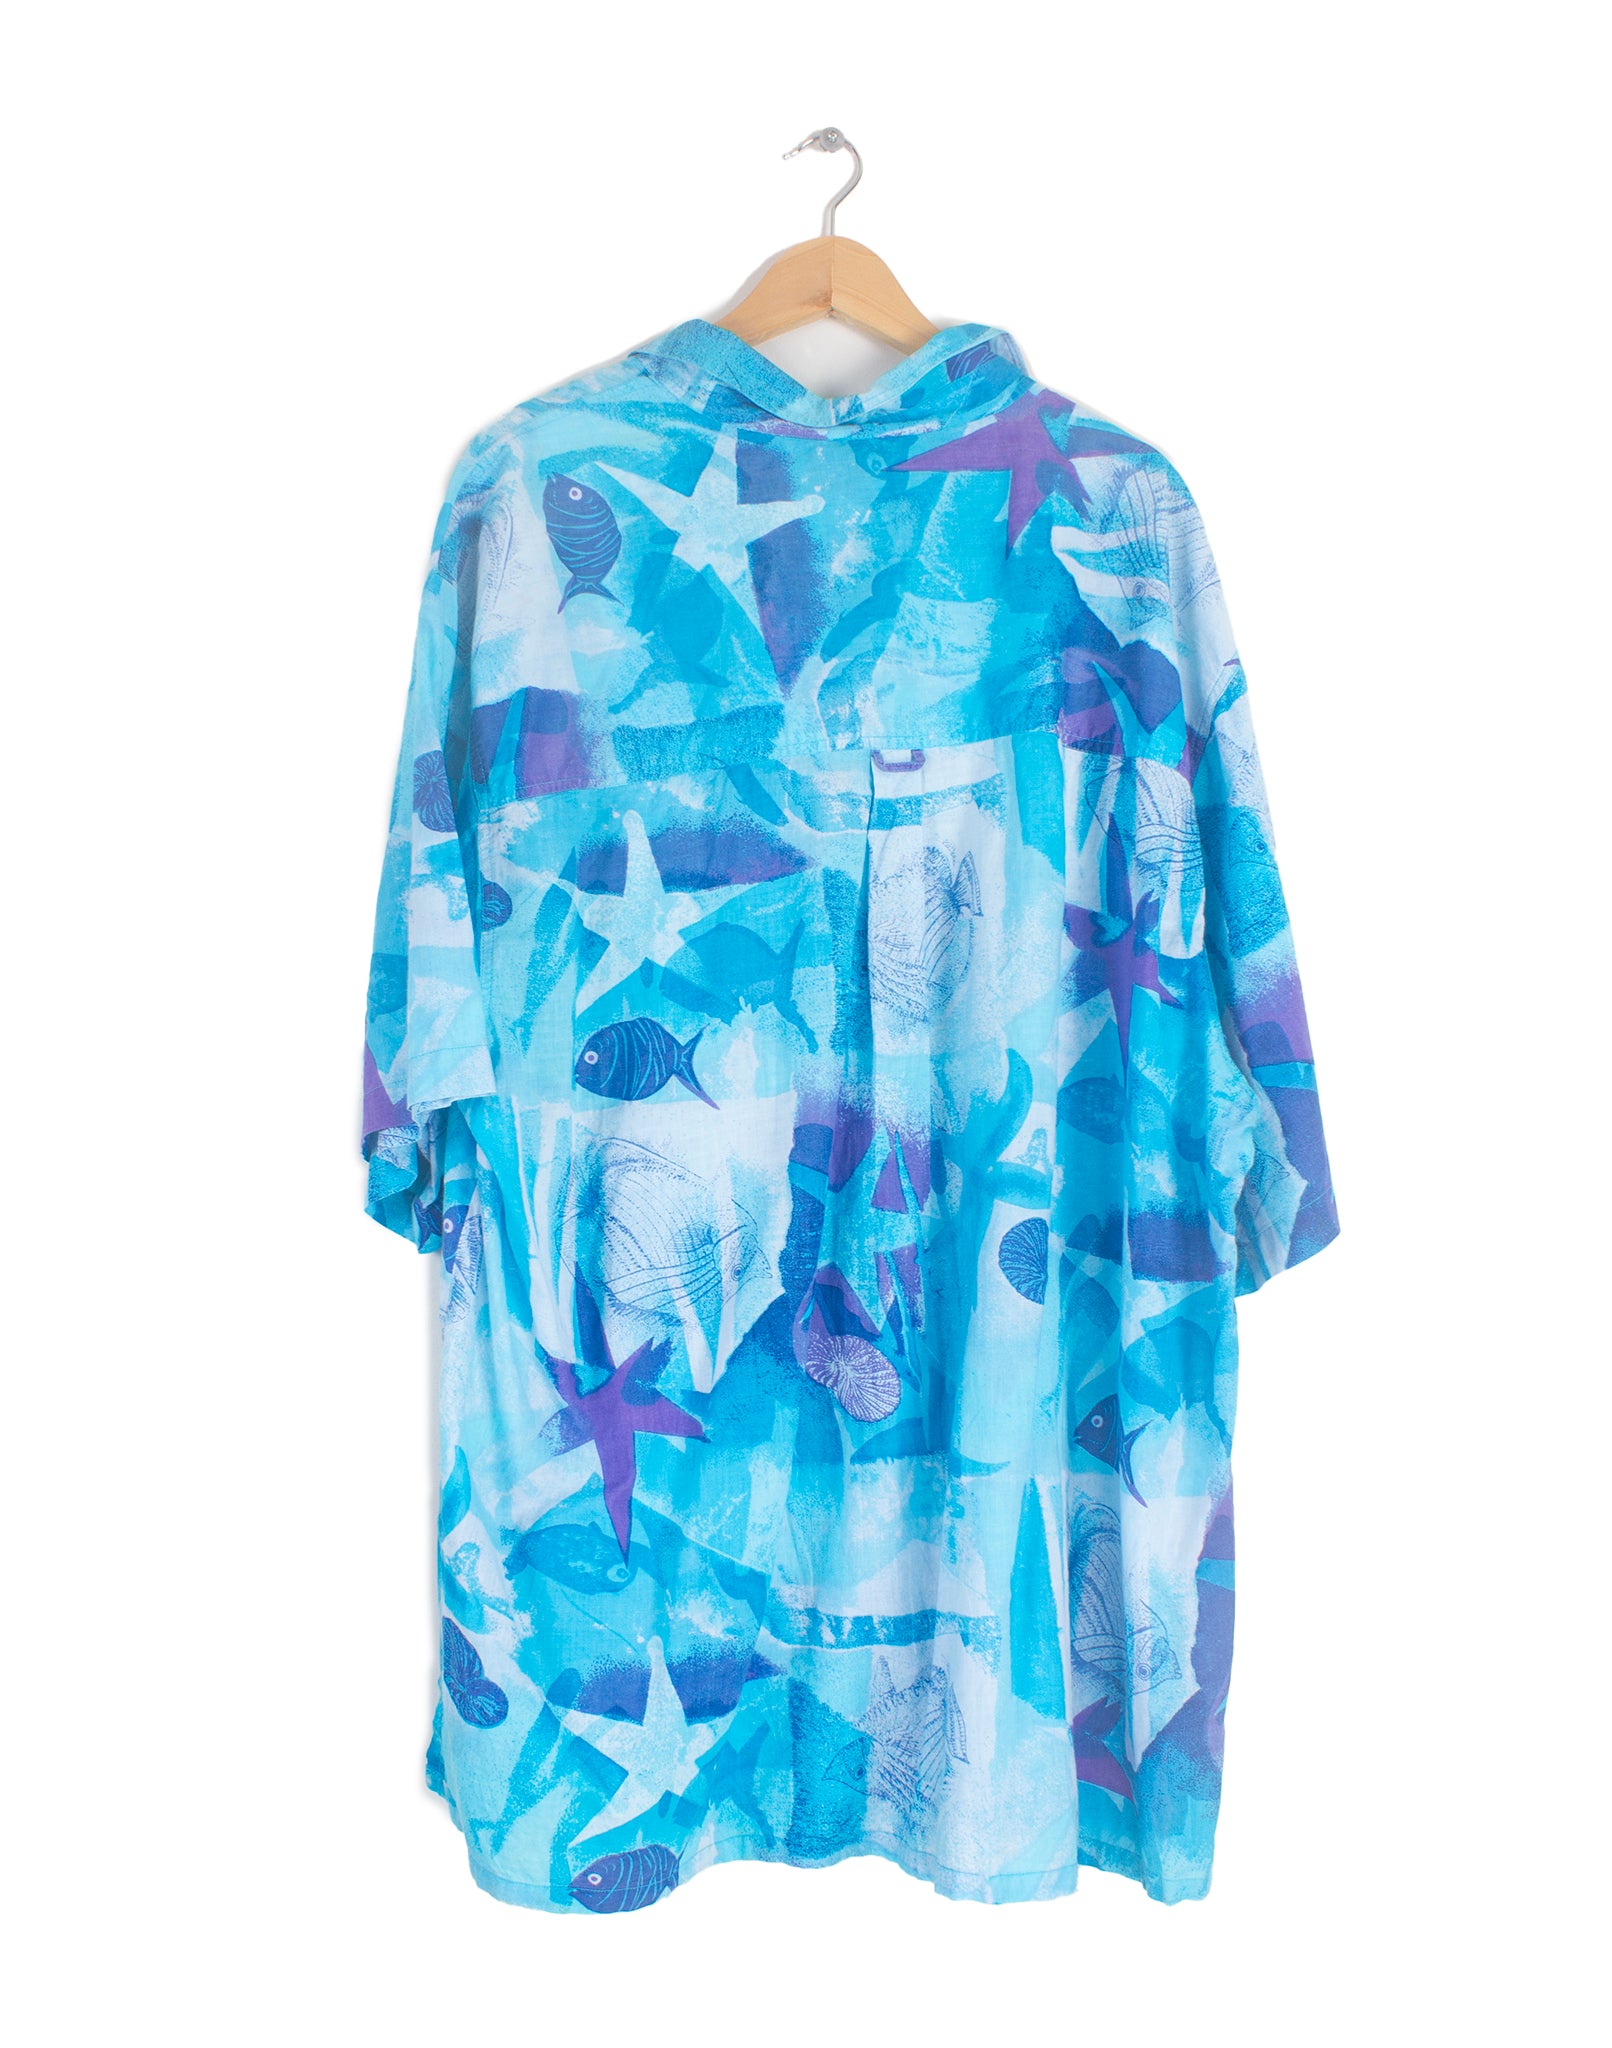 Vintage 90's Blue Abstract Floaty Long Shirt - Size XXL